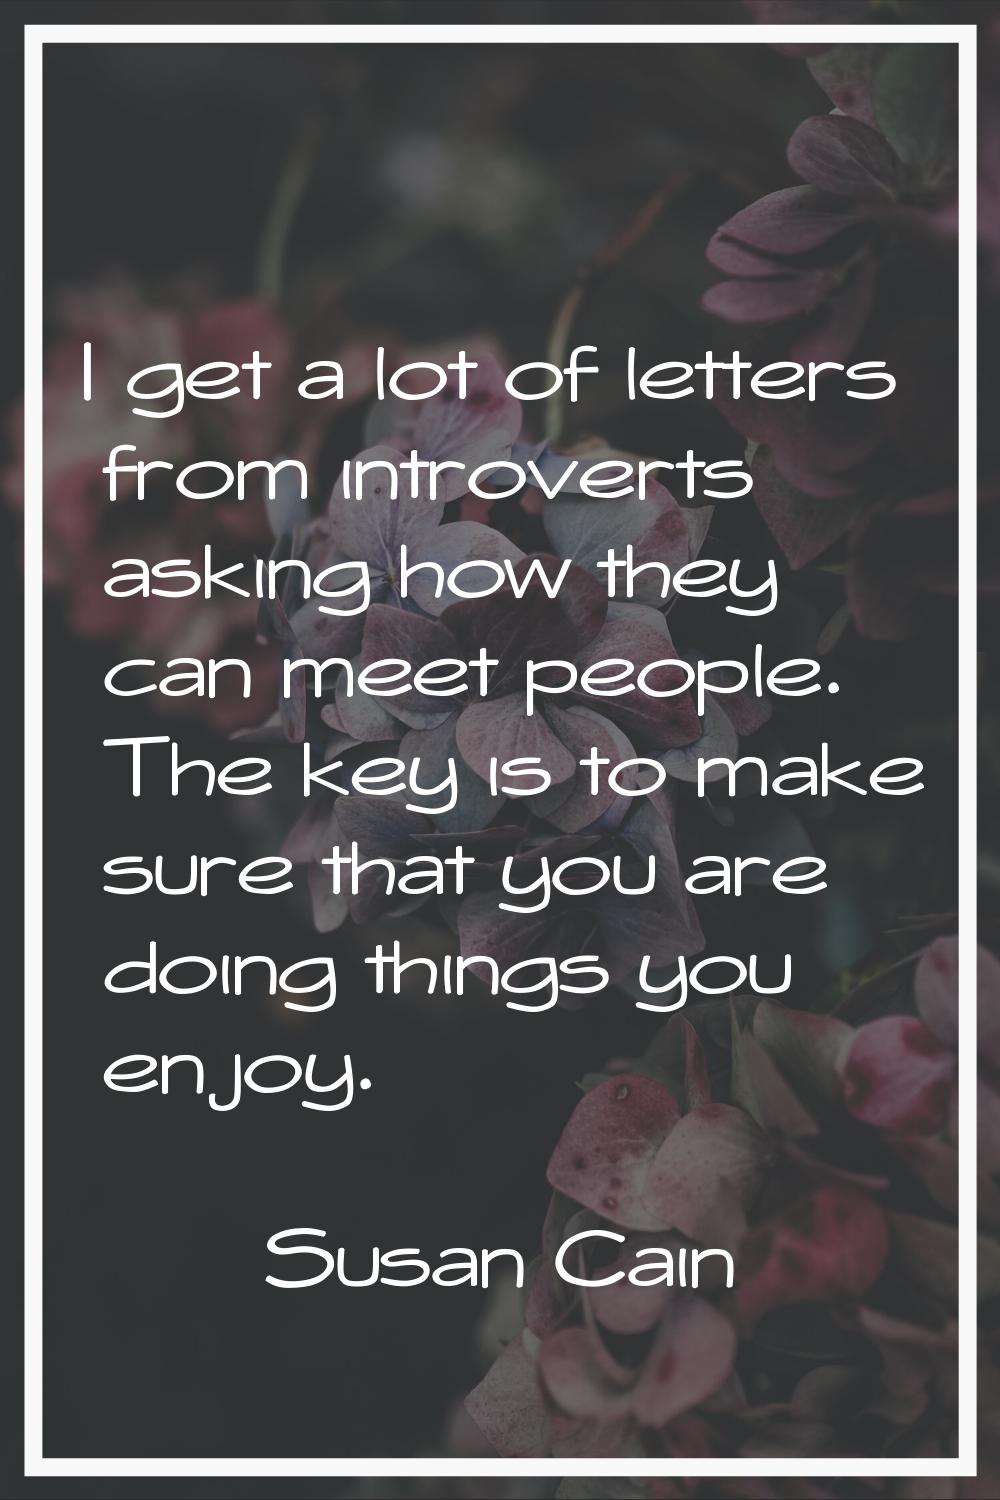 I get a lot of letters from introverts asking how they can meet people. The key is to make sure tha